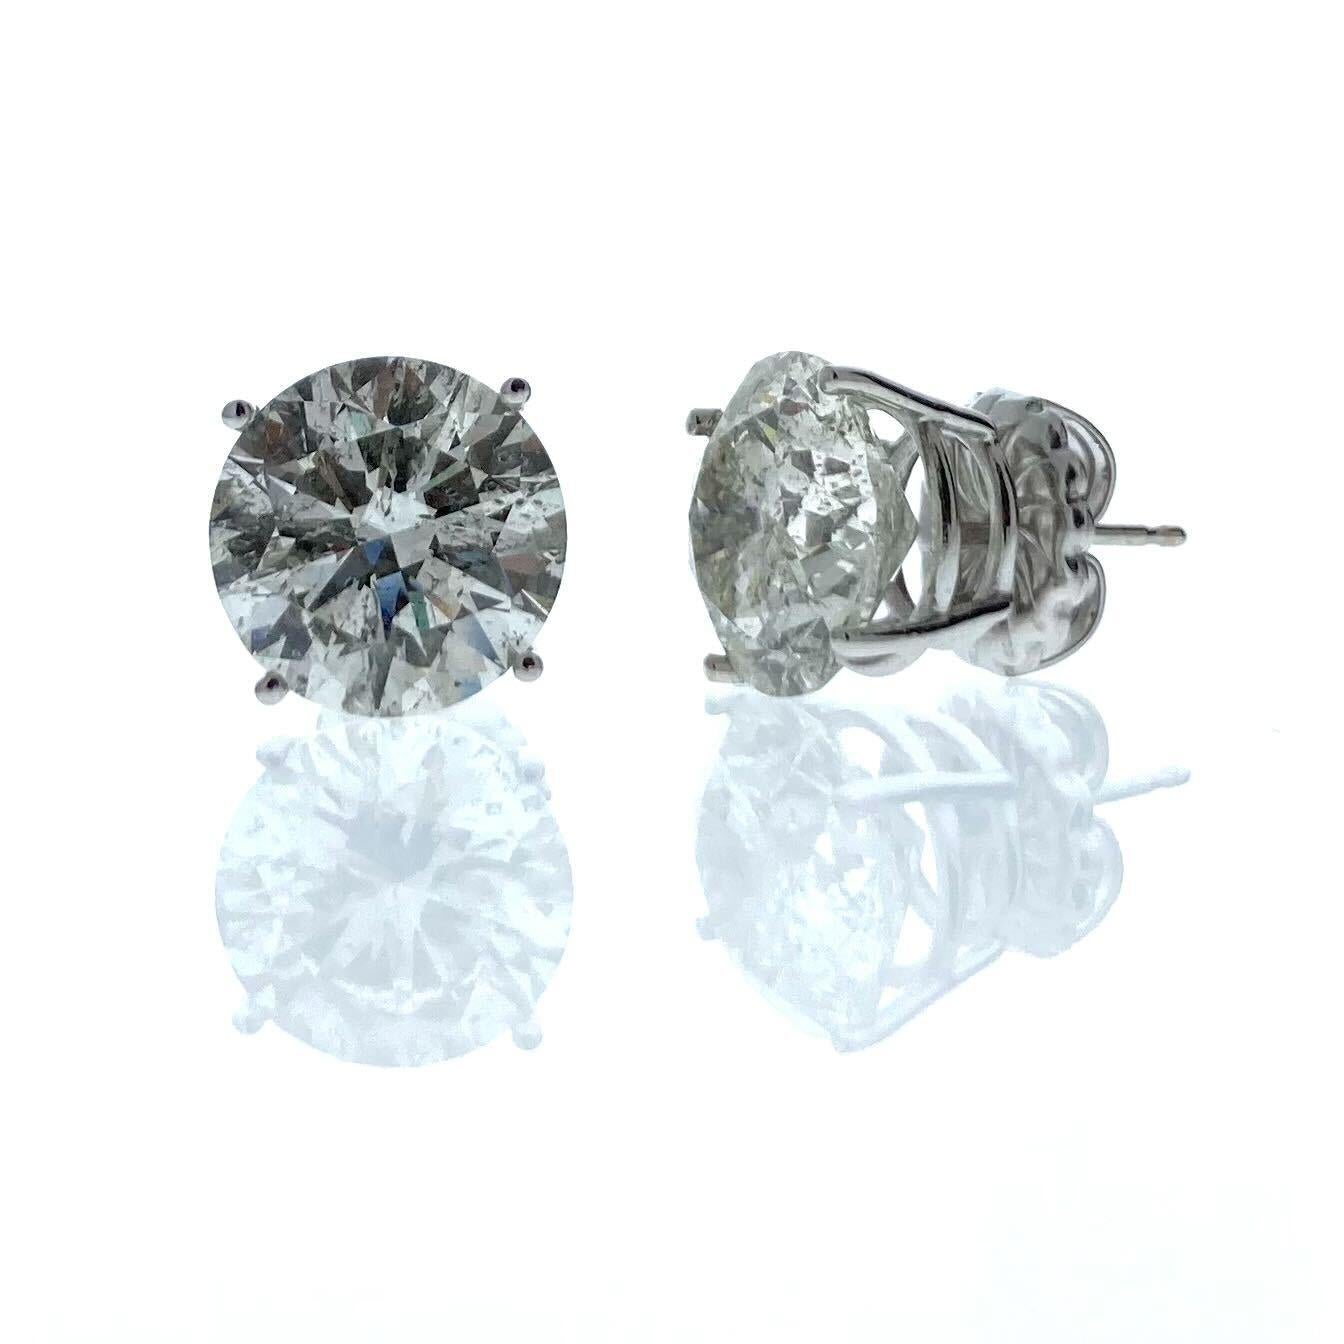 Round Cut 10.03 Total Carat Weight AGS Certified Round Diamond Studs In 14k White Gold For Sale